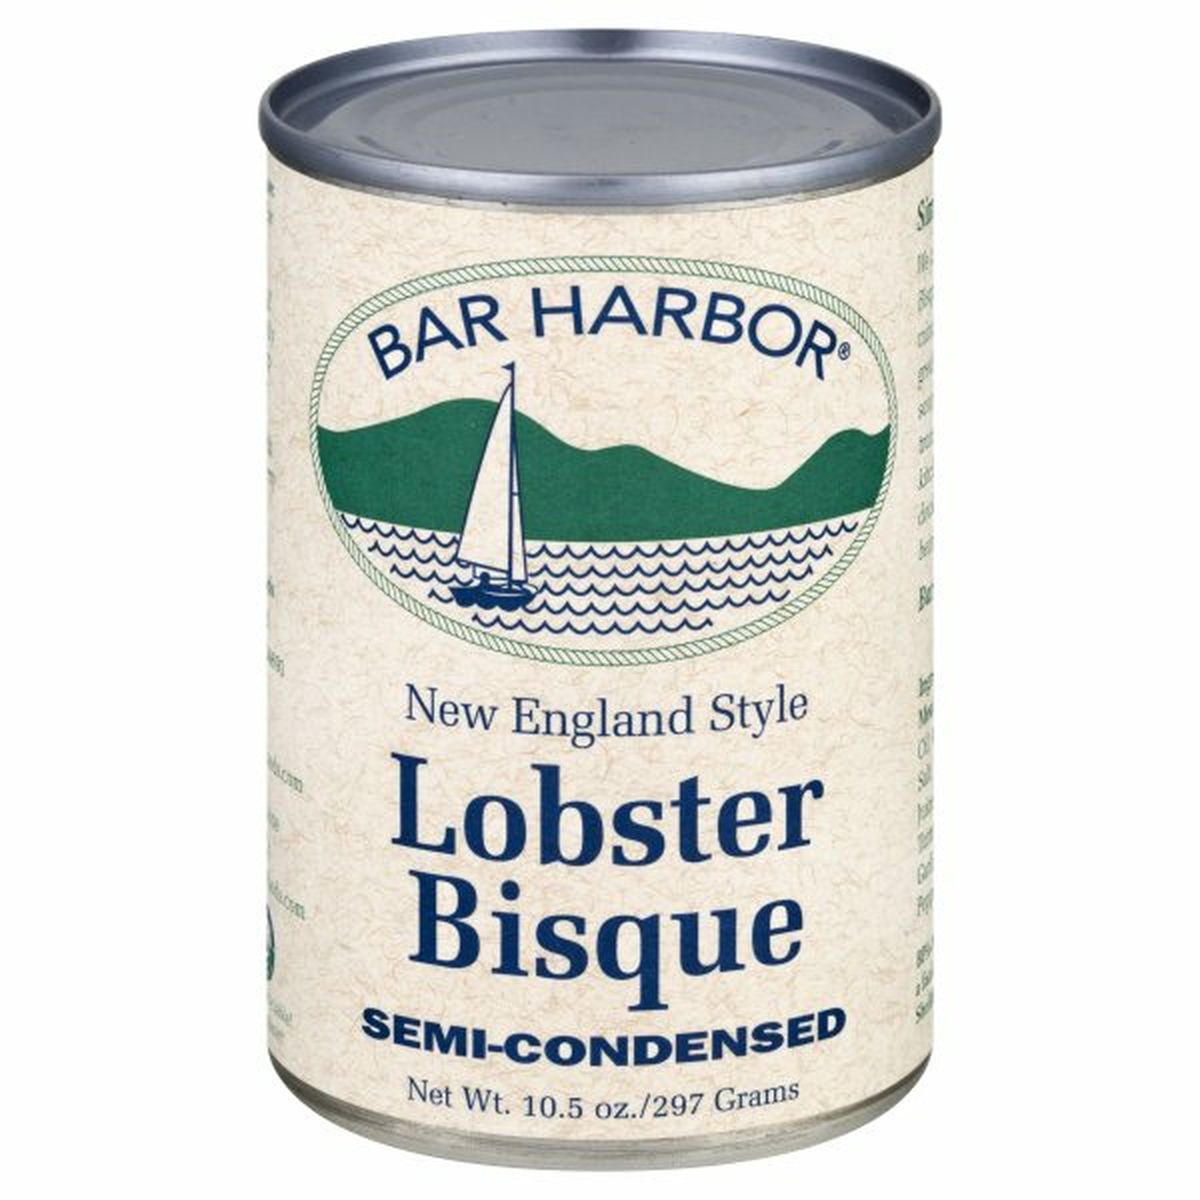 Calories in Bar Harbor Lobster Bisque, New England Style, Semi-Condensed